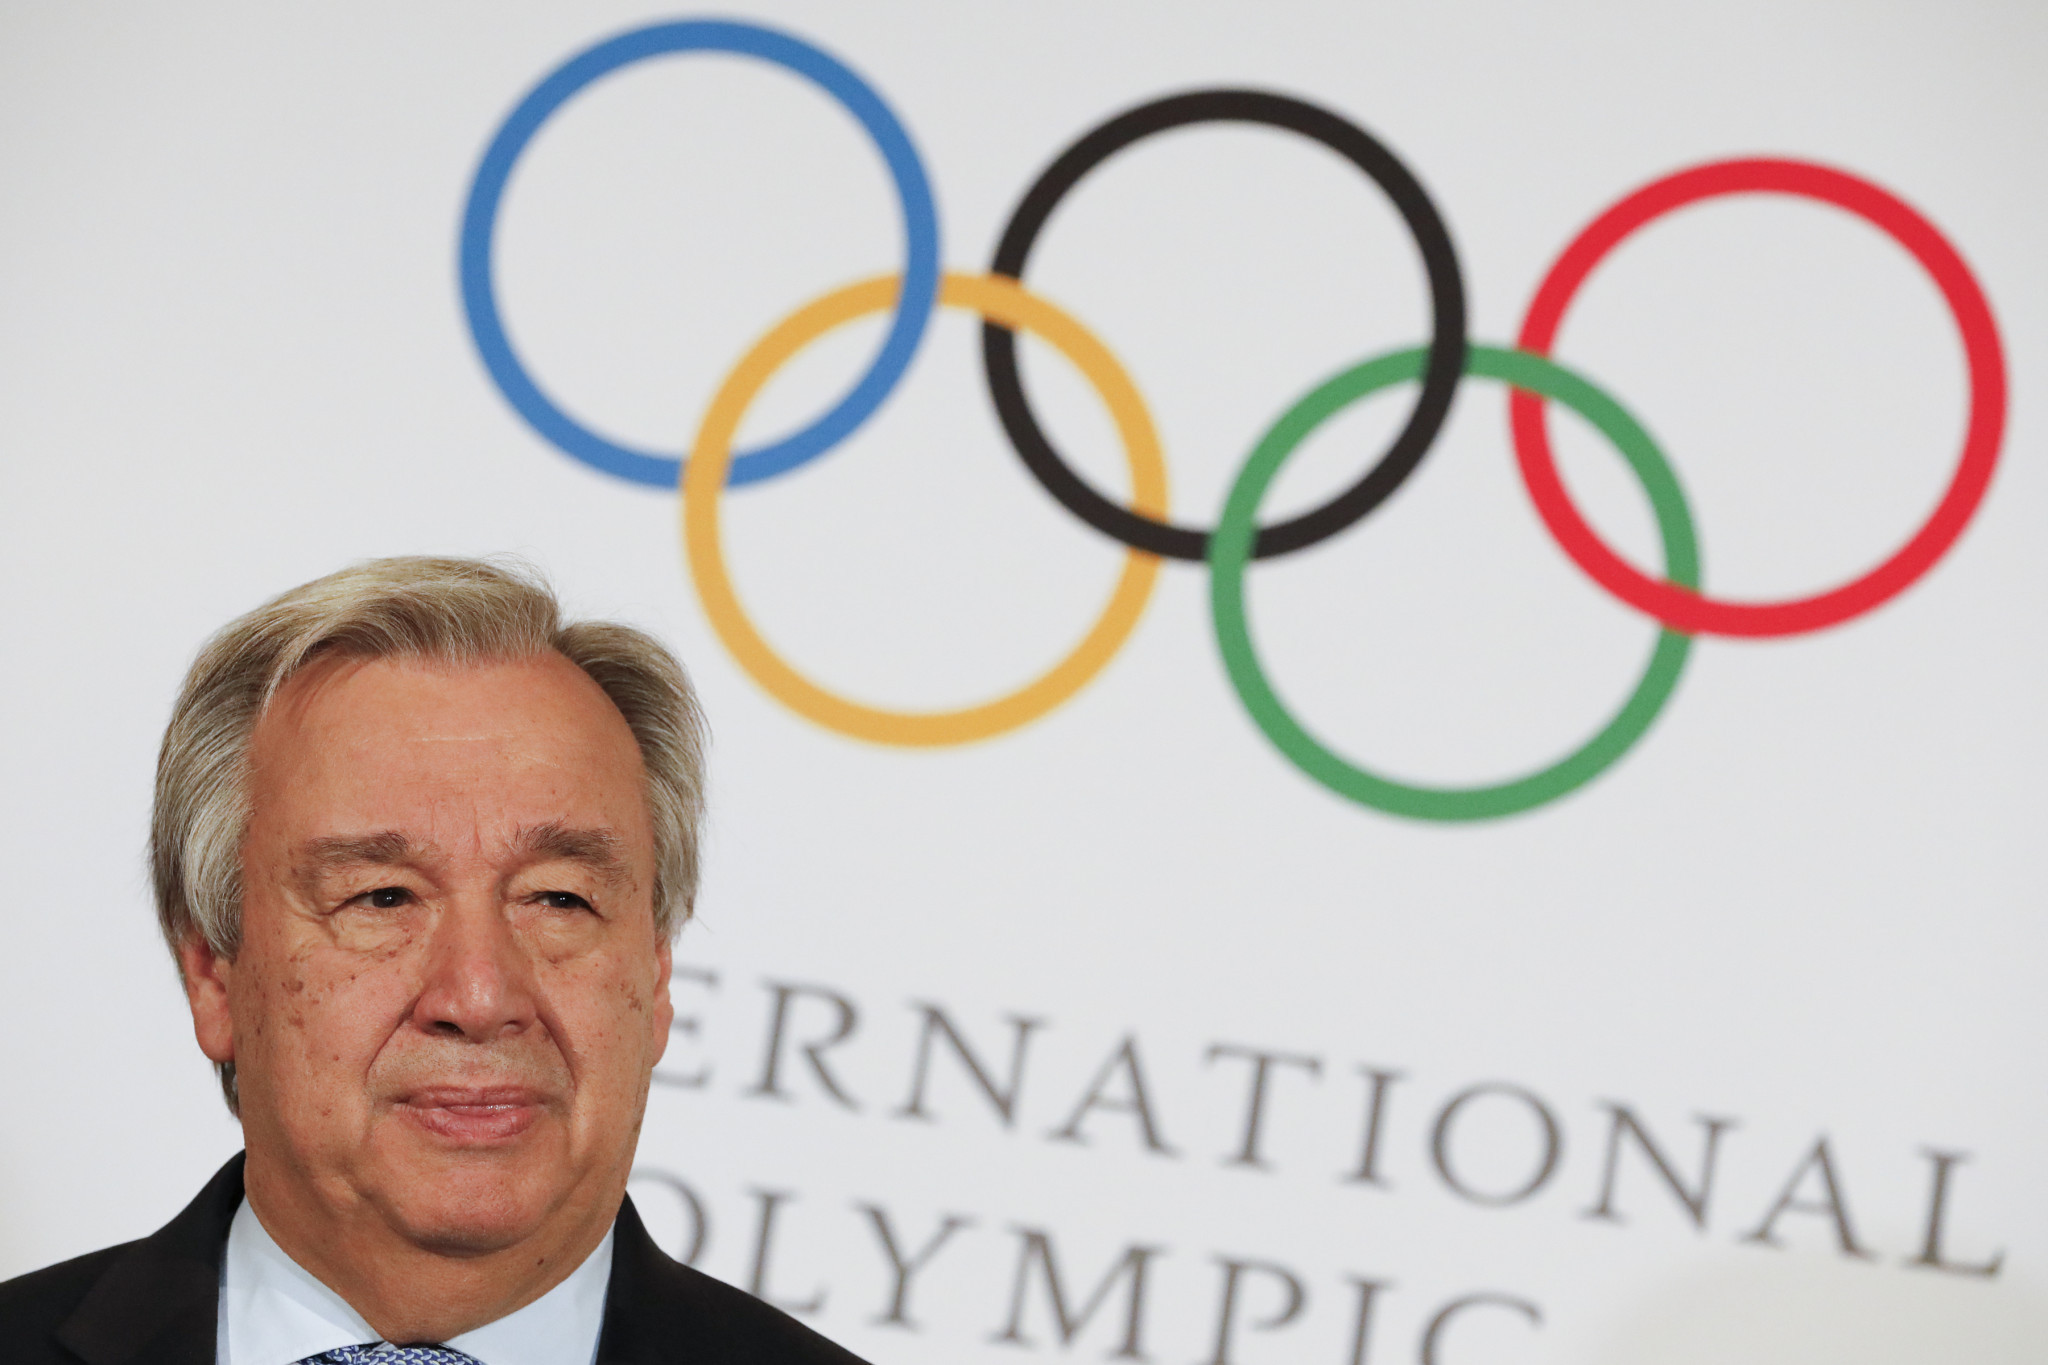 António Guterres received an invitation to Beijing 2022 from the International Olympic Committee ©Getty Images